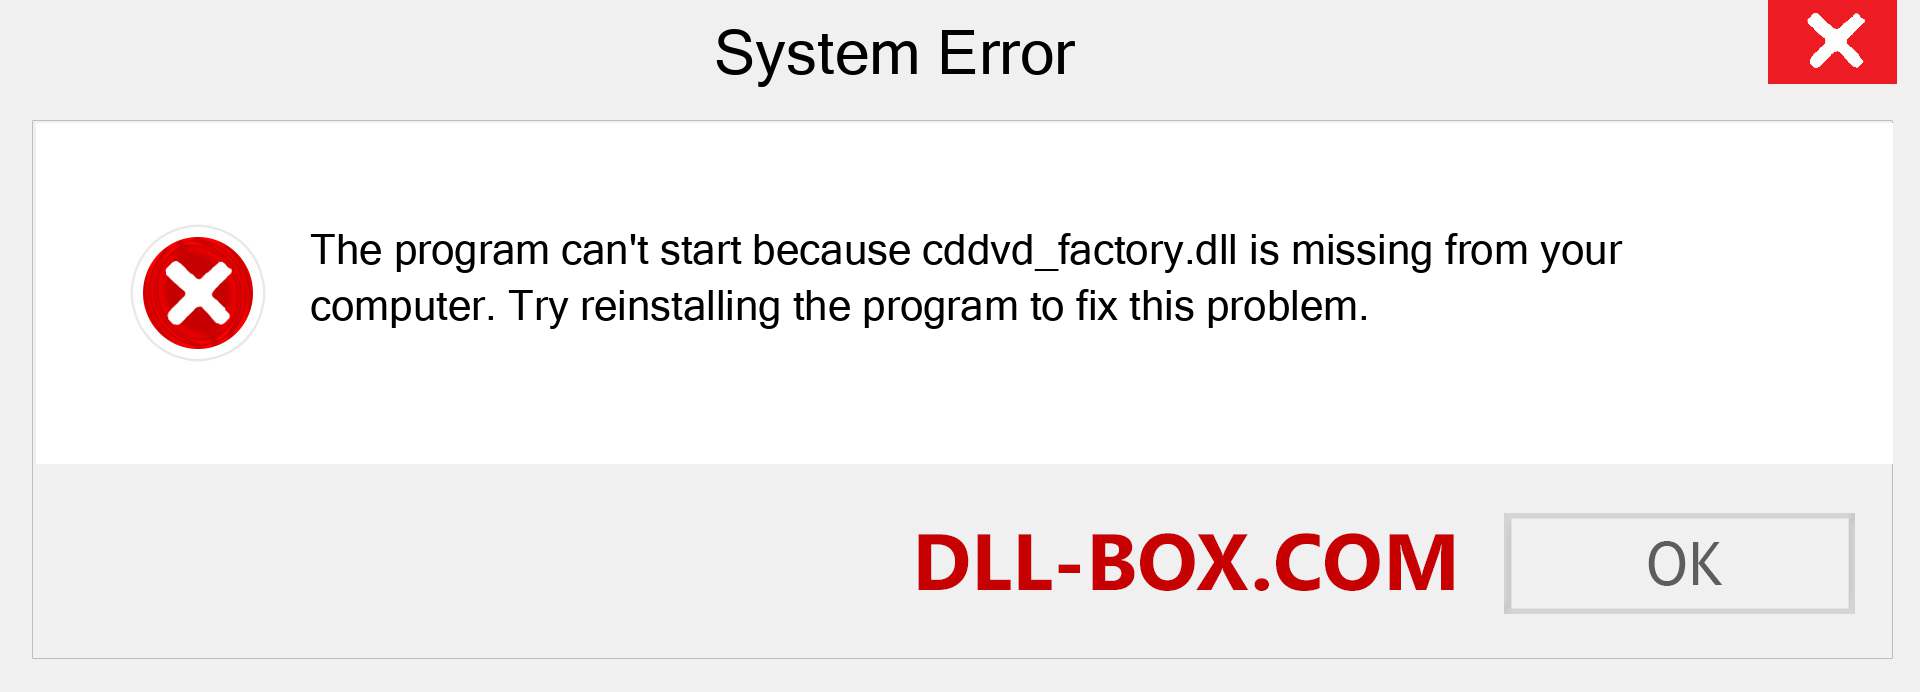  cddvd_factory.dll file is missing?. Download for Windows 7, 8, 10 - Fix  cddvd_factory dll Missing Error on Windows, photos, images